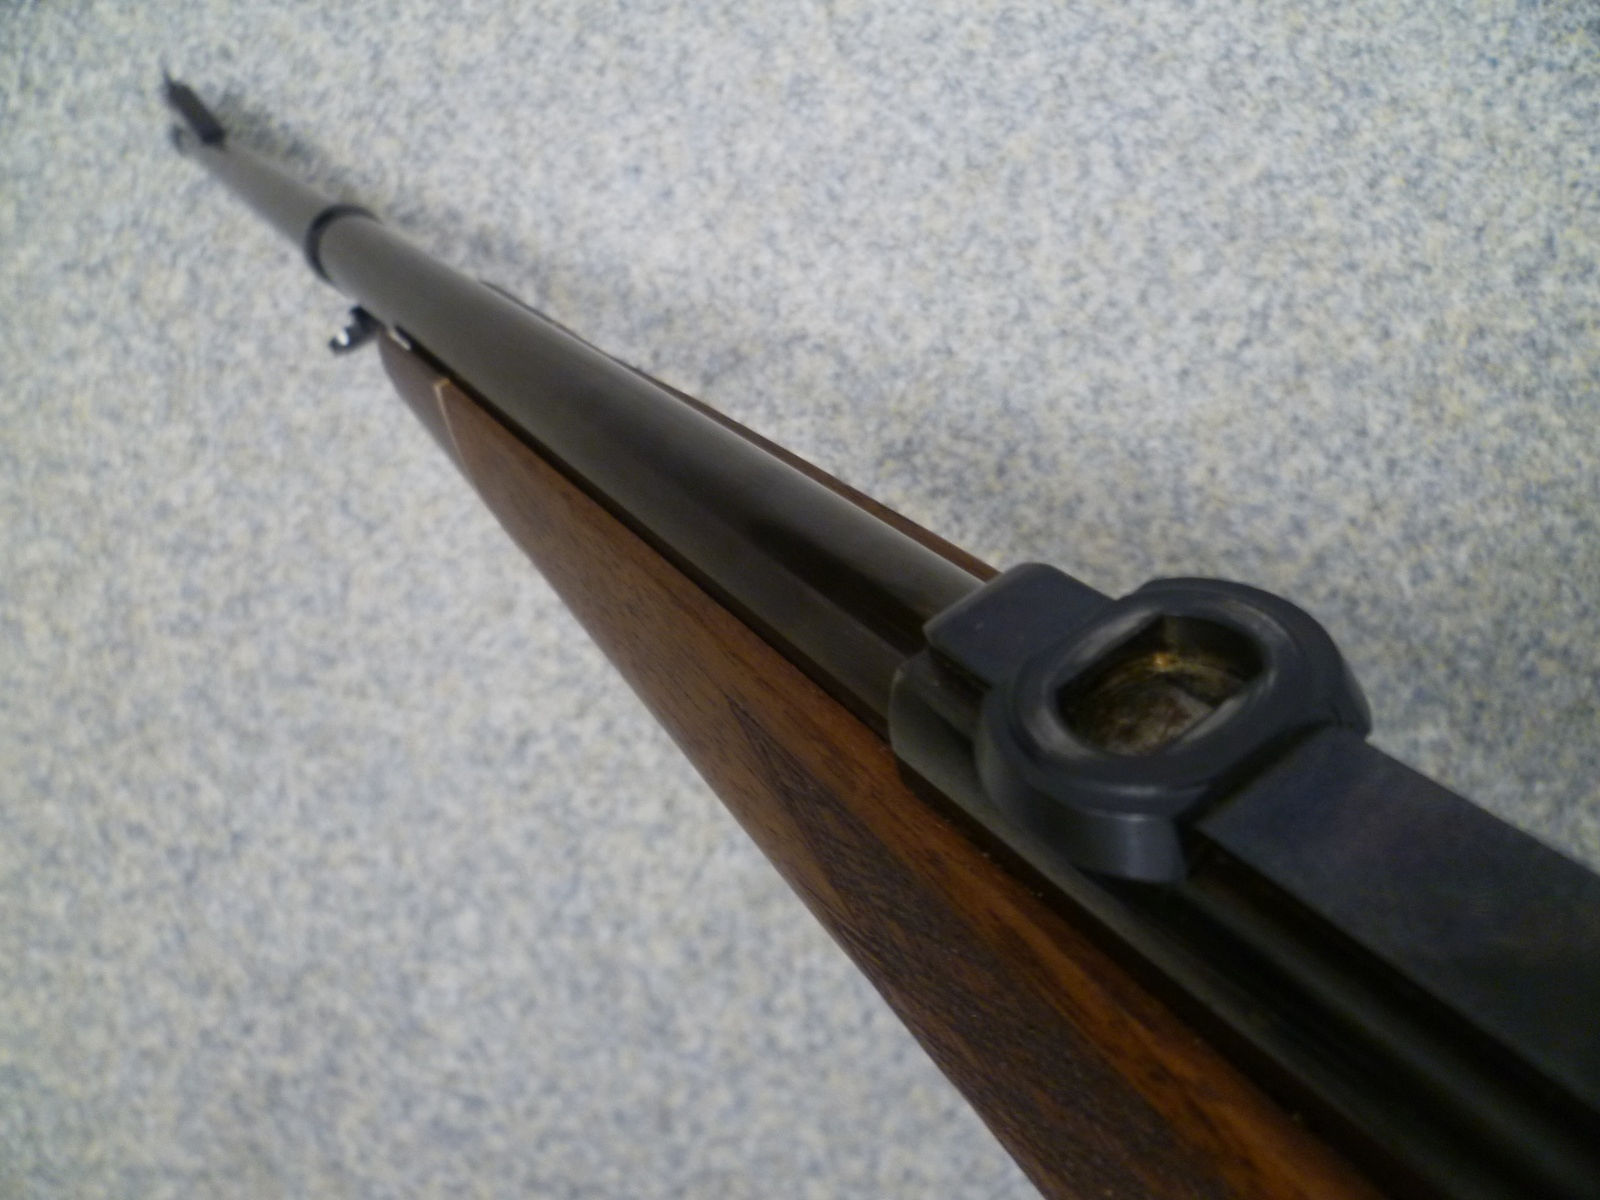 Repetierbüchse Mauser Modell 66 7x64